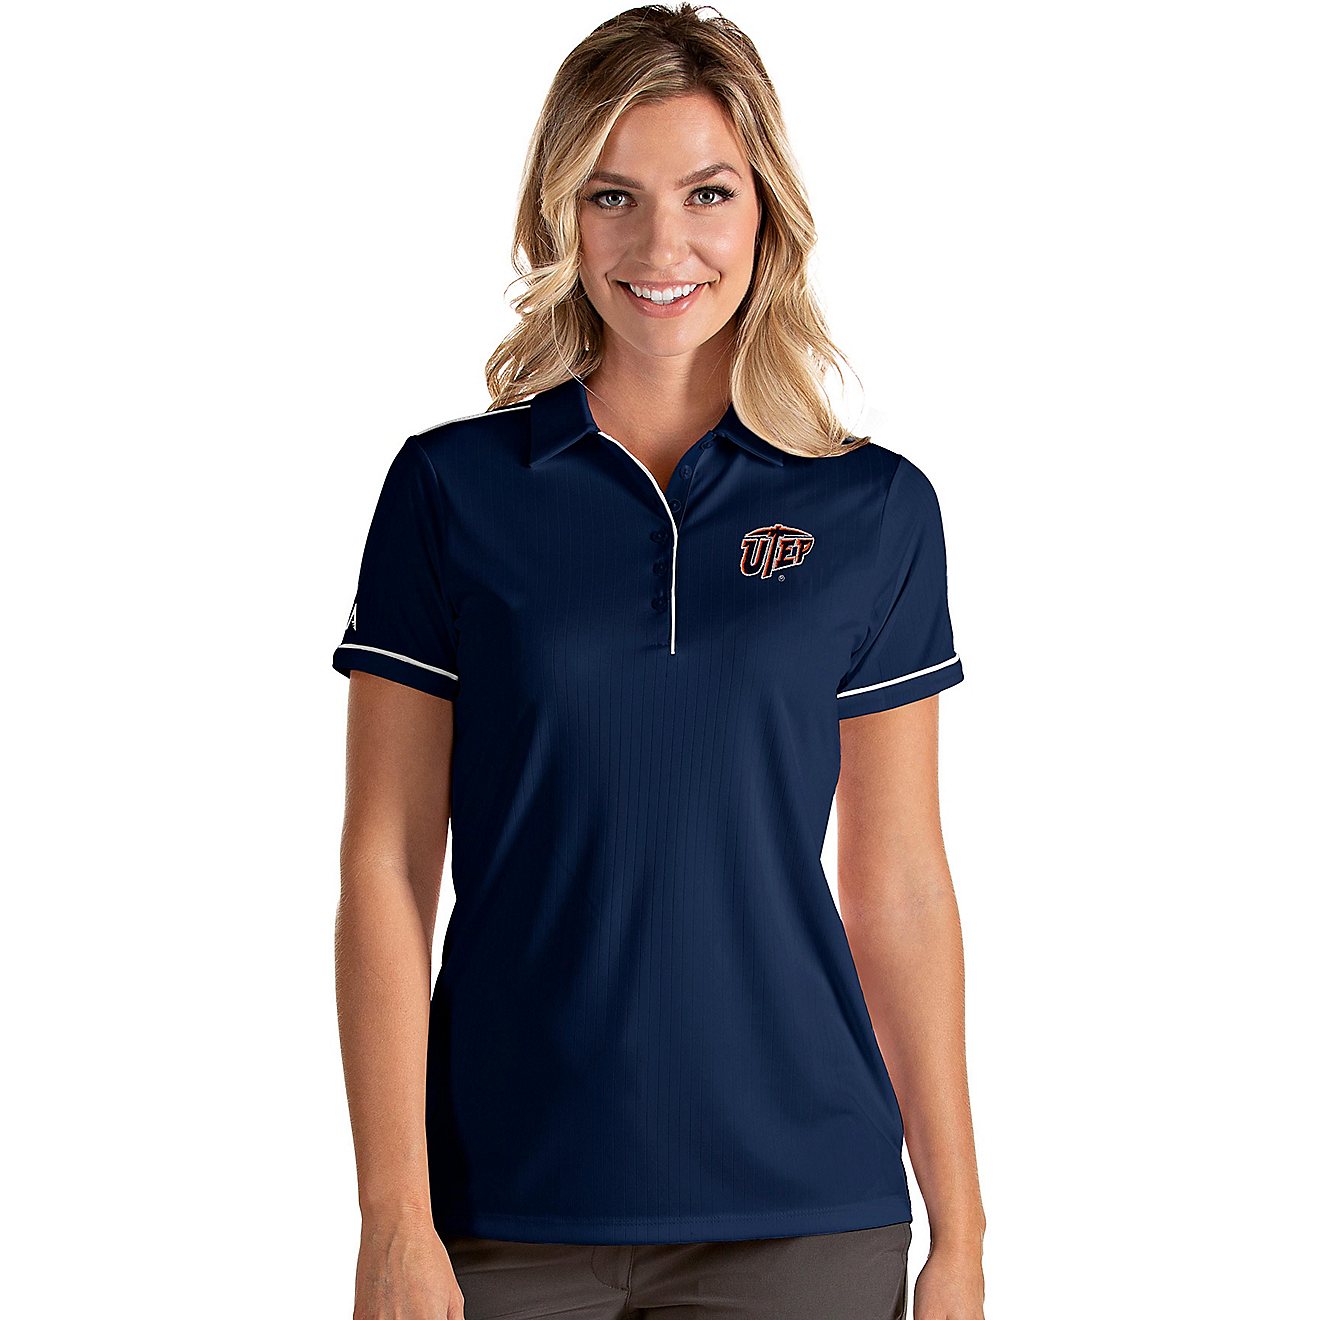 Antigua Women's University of Texas at El Paso Salute Polo Shirt                                                                 - view number 1